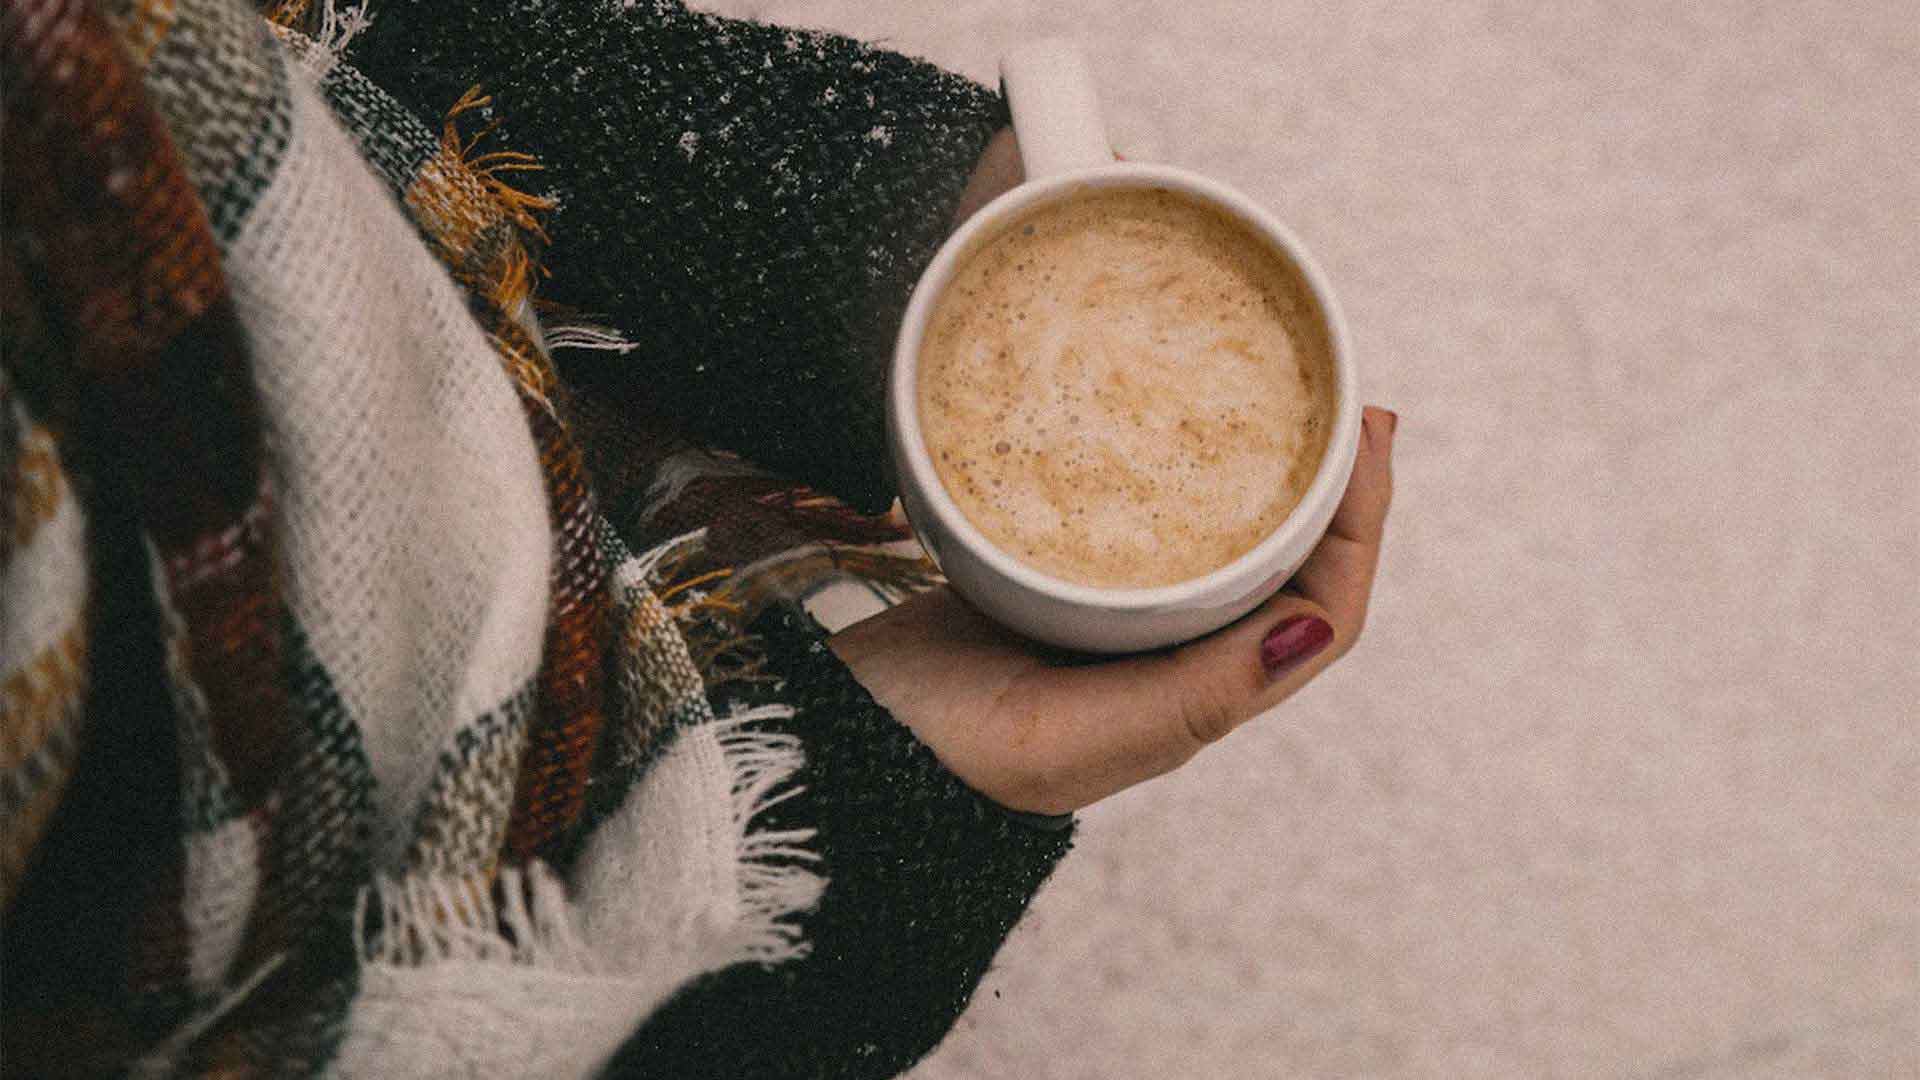 woman holding a cup of coffee